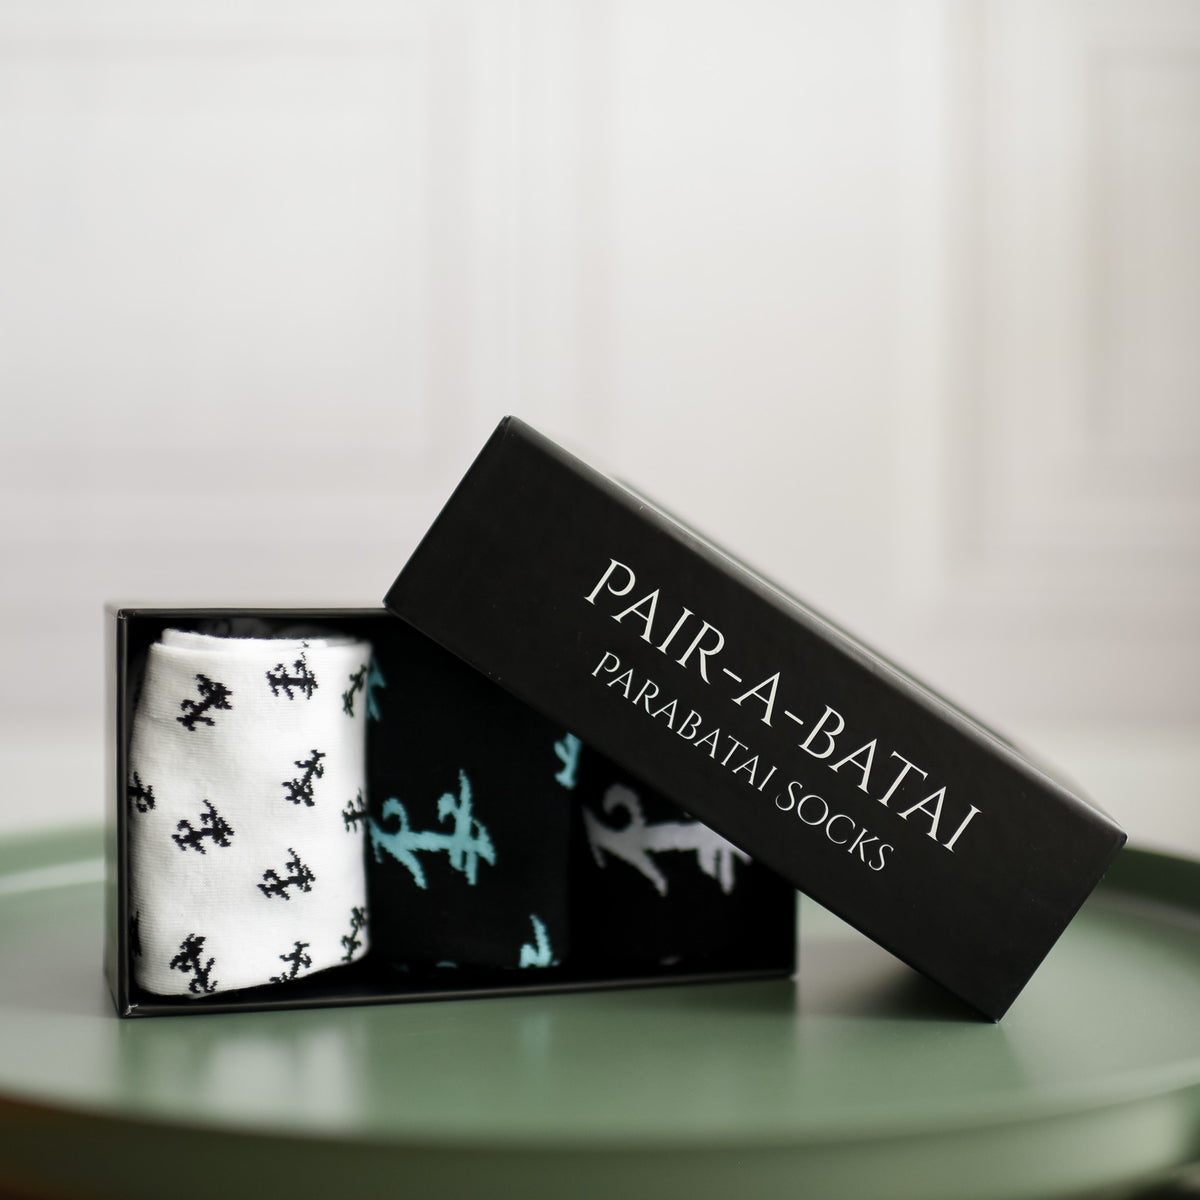 SOCK SET - Parabatai from LitJoy Crate | Collectibles &amp; Gifts for Booklovers